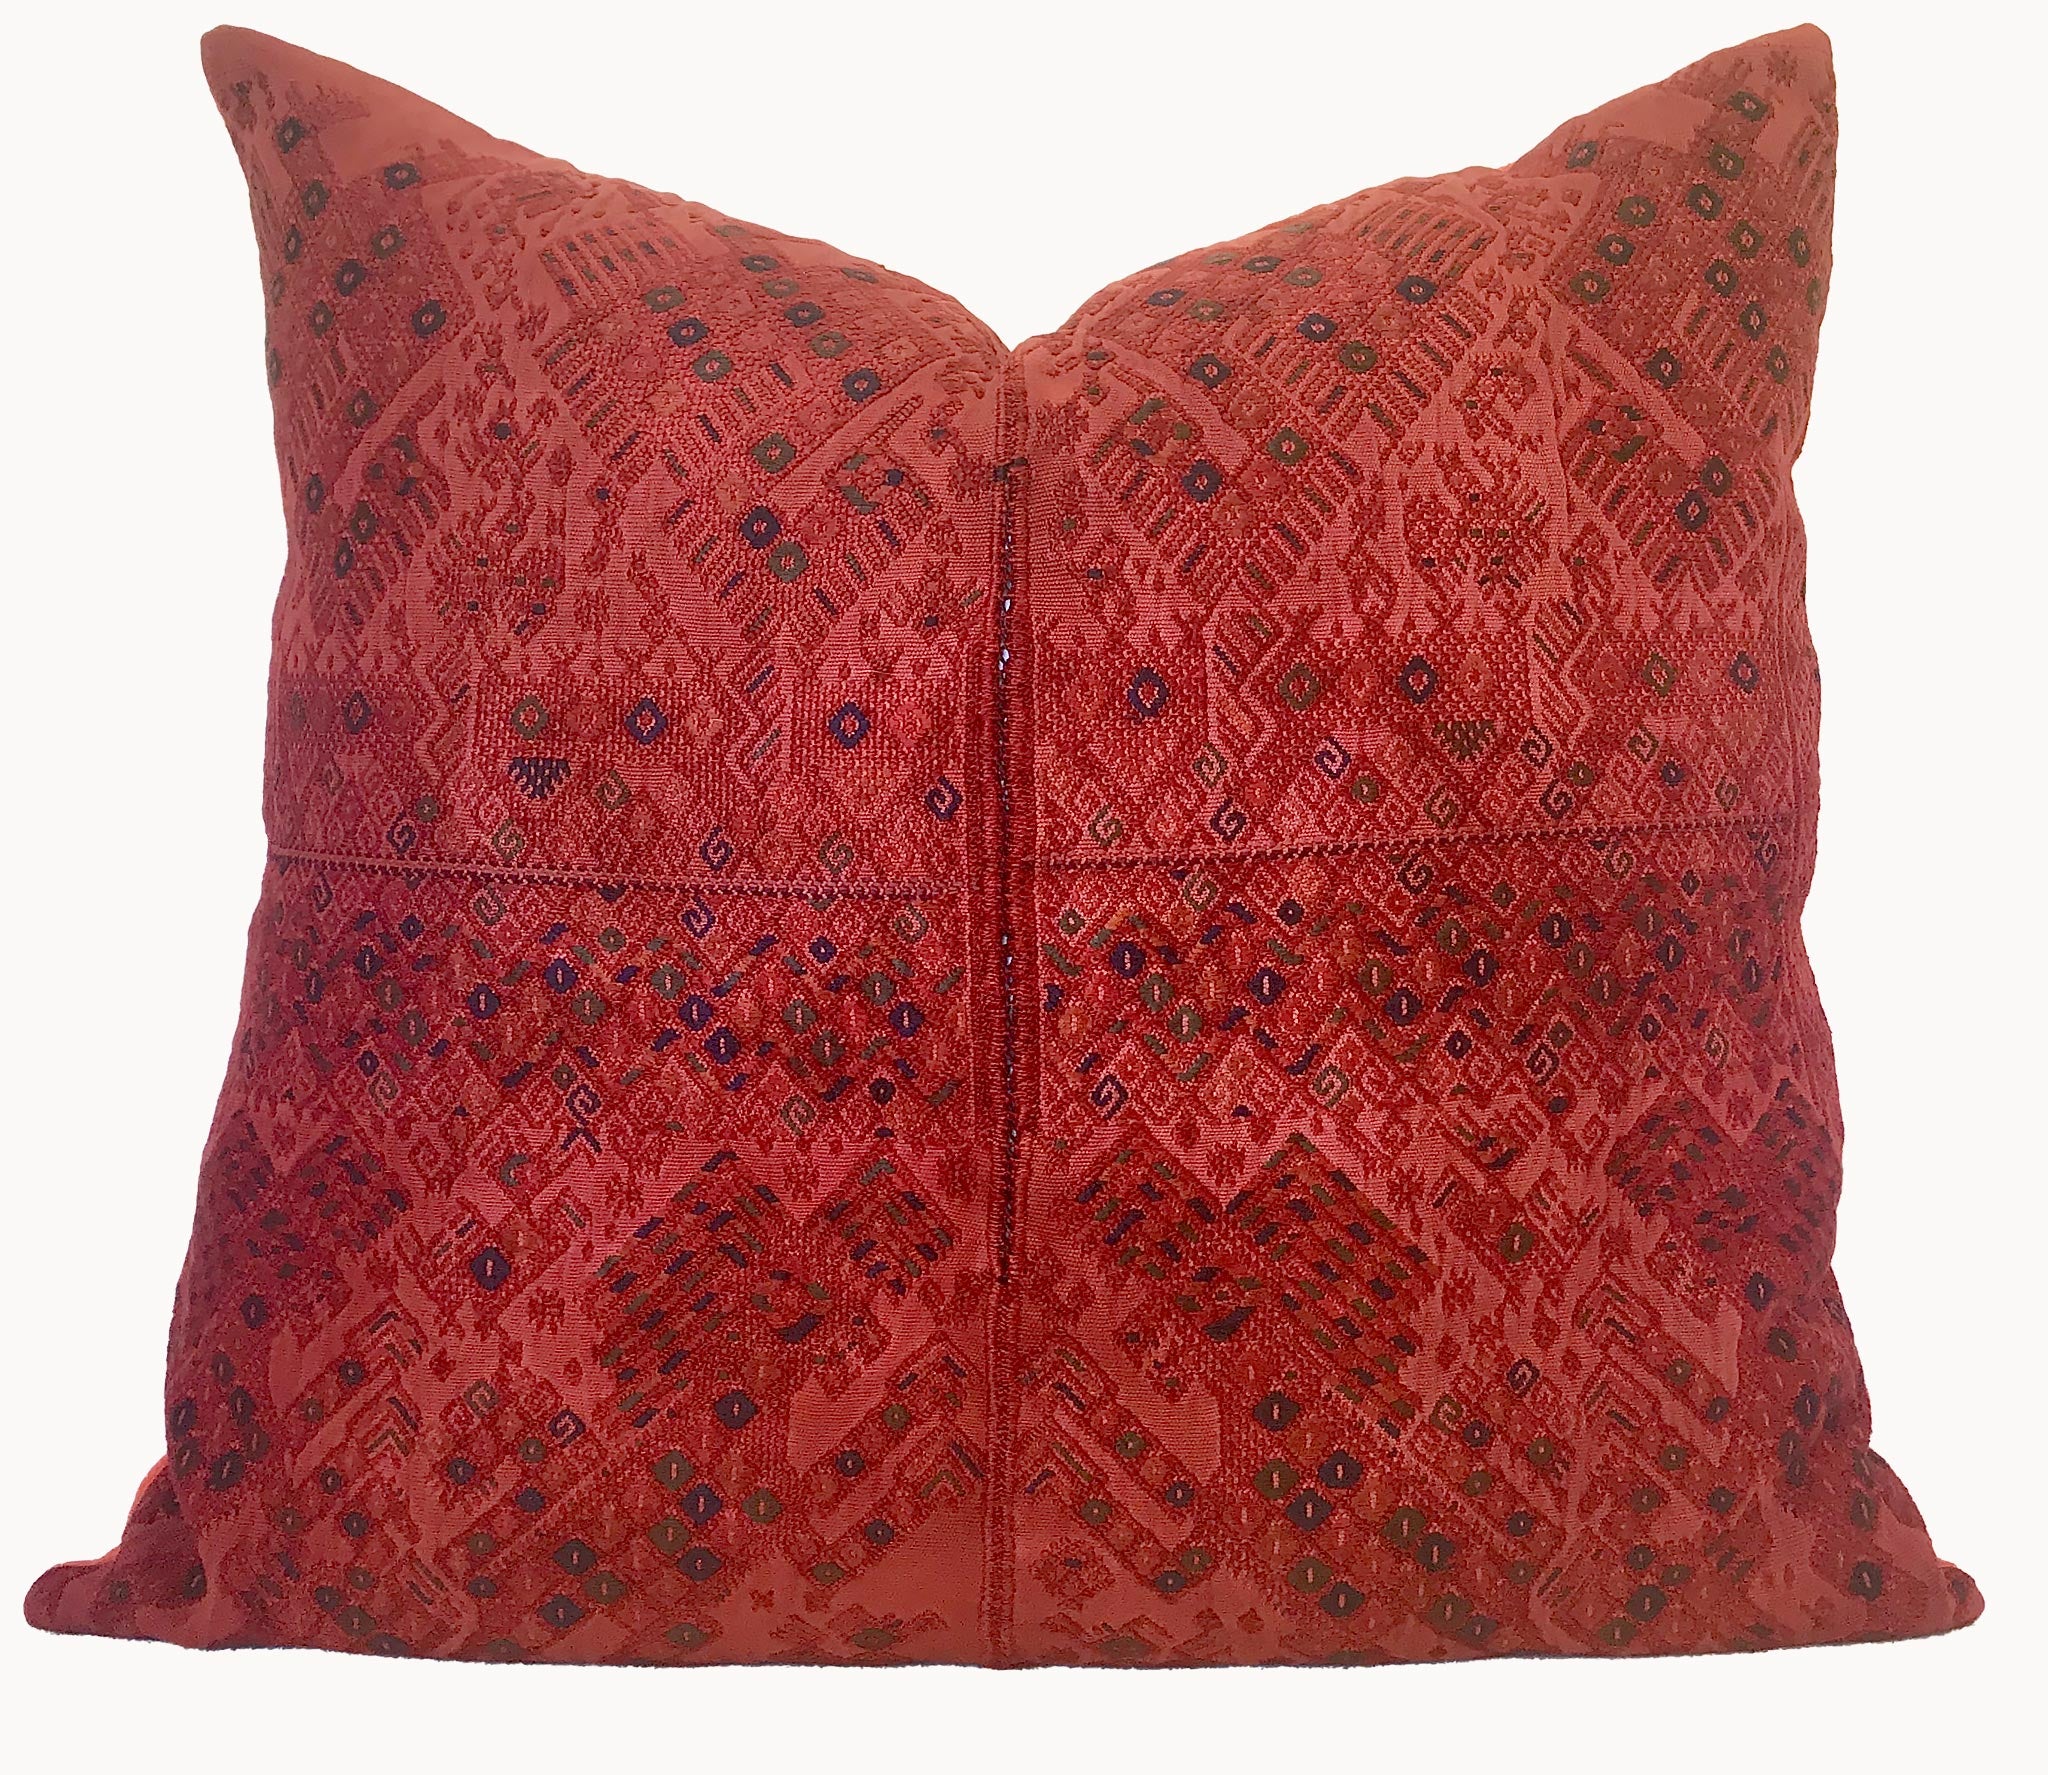 Guatemalan Huipil Textile Pillow, vintage, hand embroidered orange Nahuala huipil with stylised dancing horses